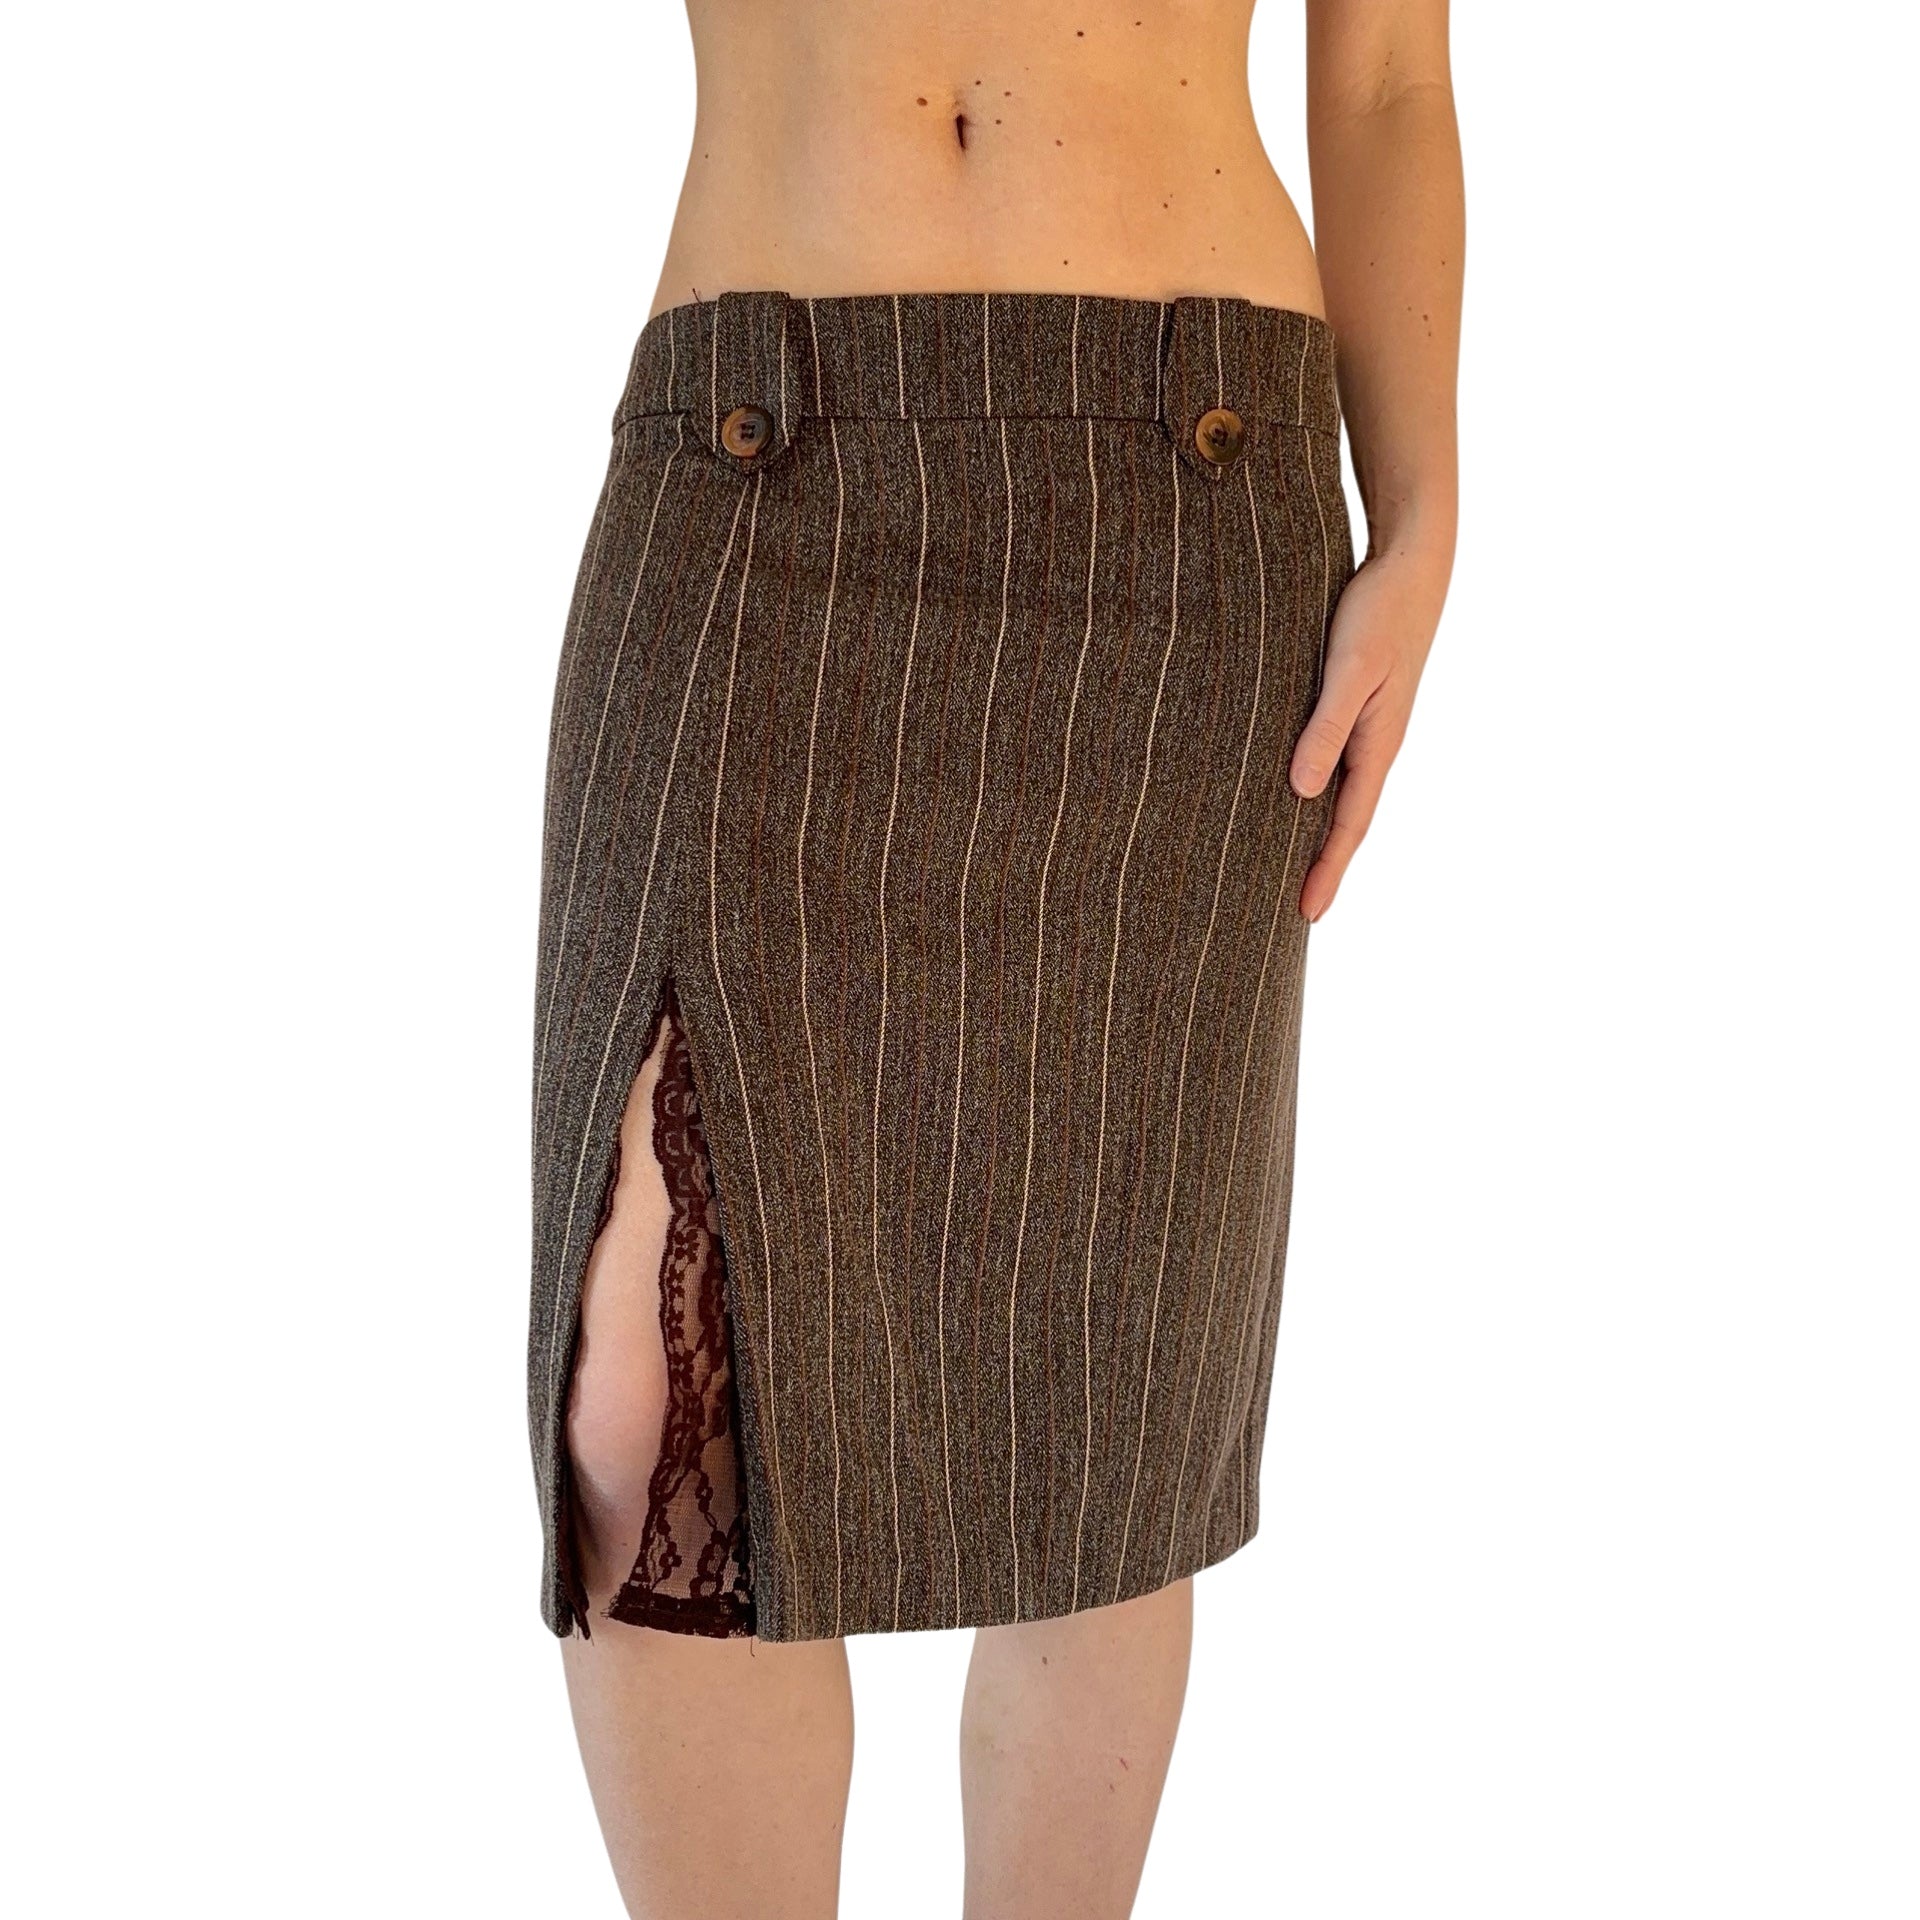 90s Pinstripe & Lace Skirt (S/M)